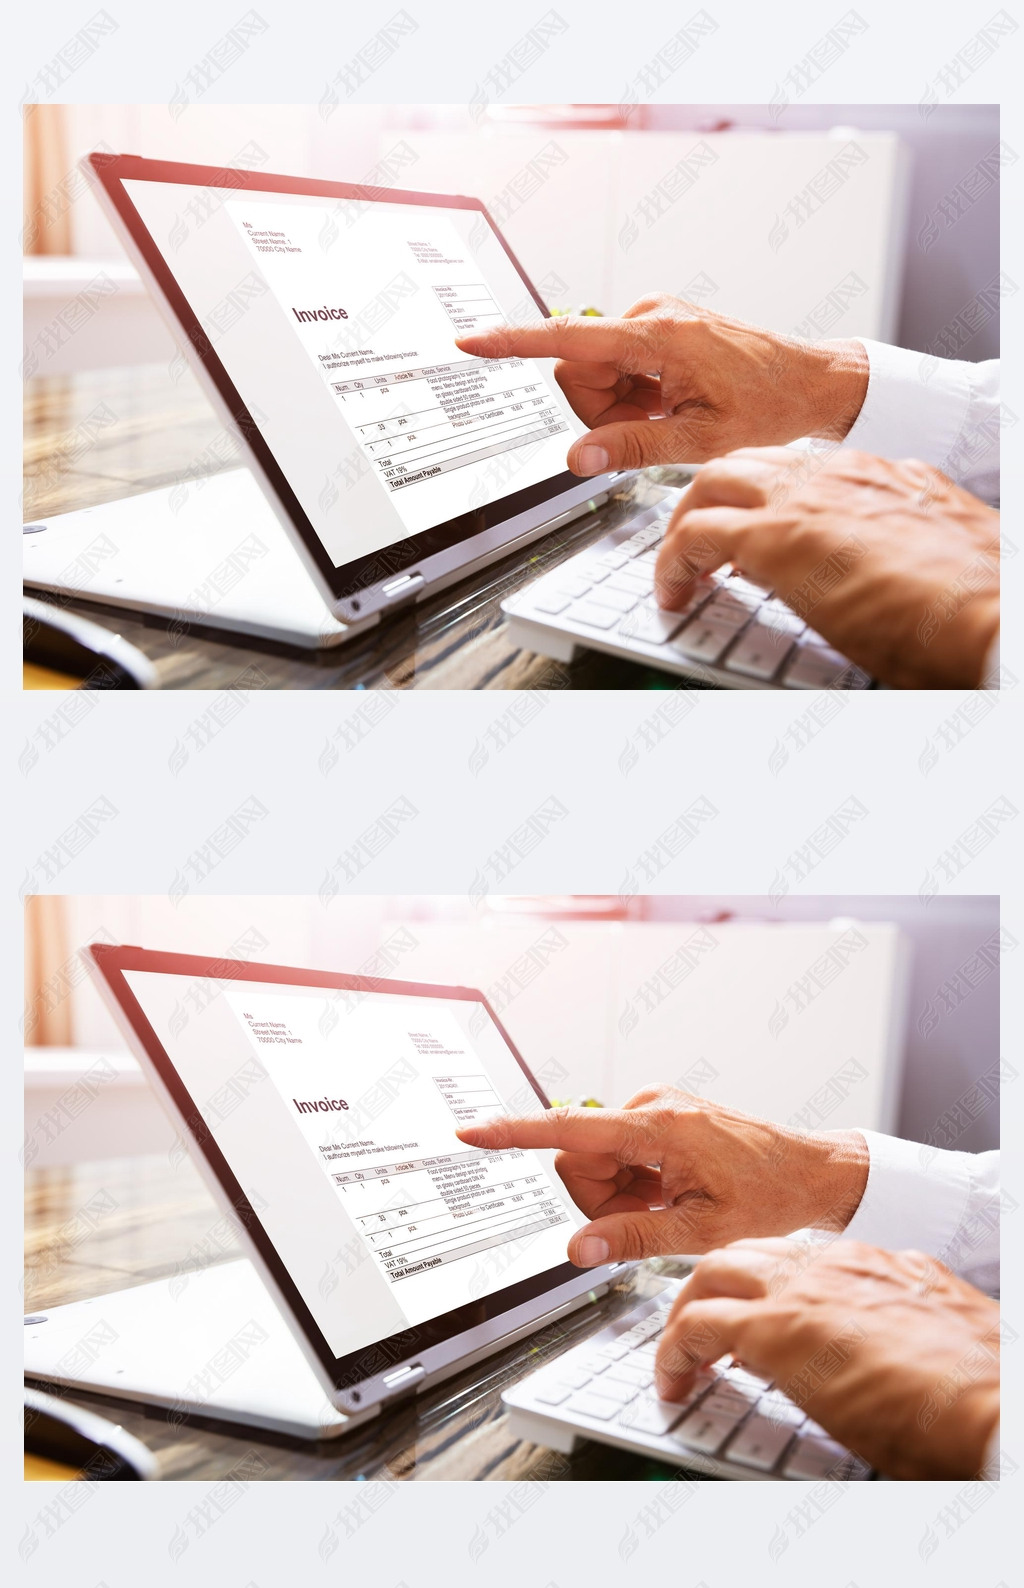 Close-up Of A Businessperson's Hand Analyzing Invoice On Laptop At Workplace